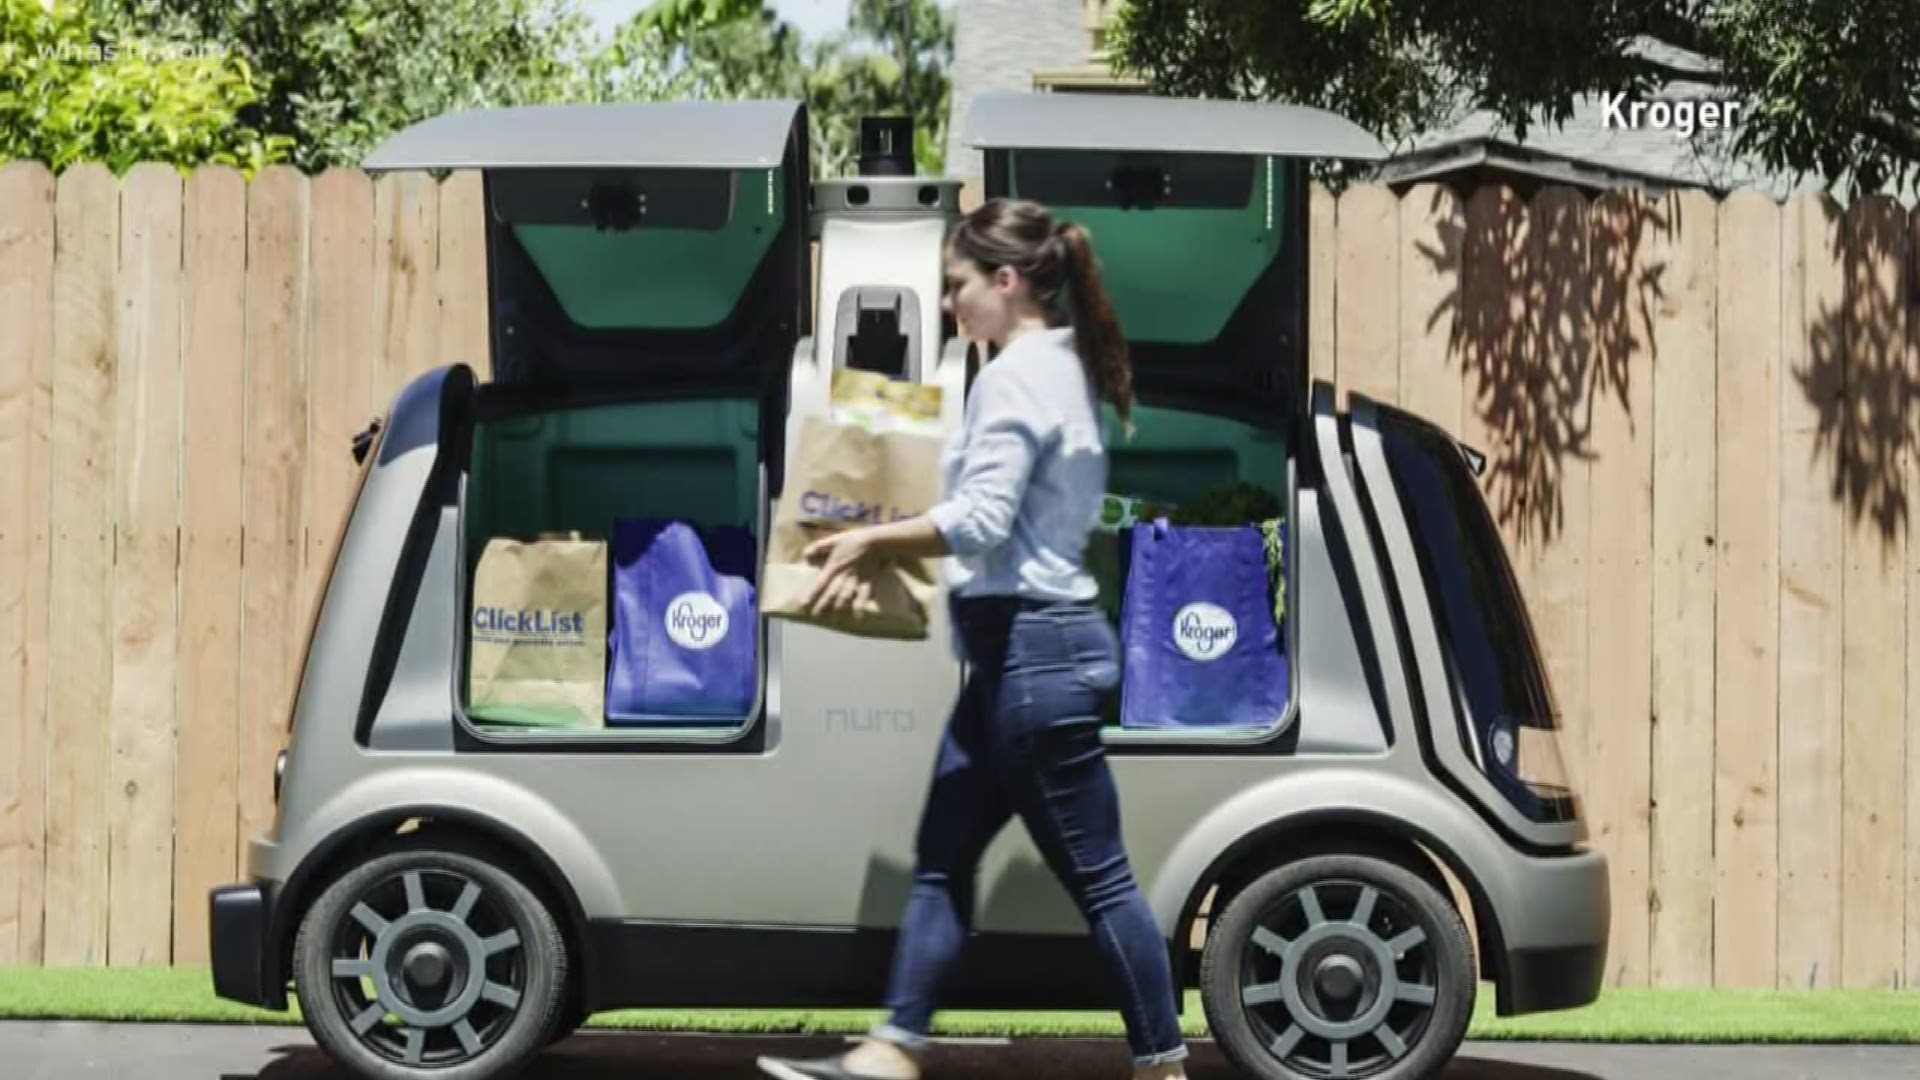 Kroger Co. is stepping up its string of high-tech advancements by launching home delivery of groceries using driverless delivery vehicles today.